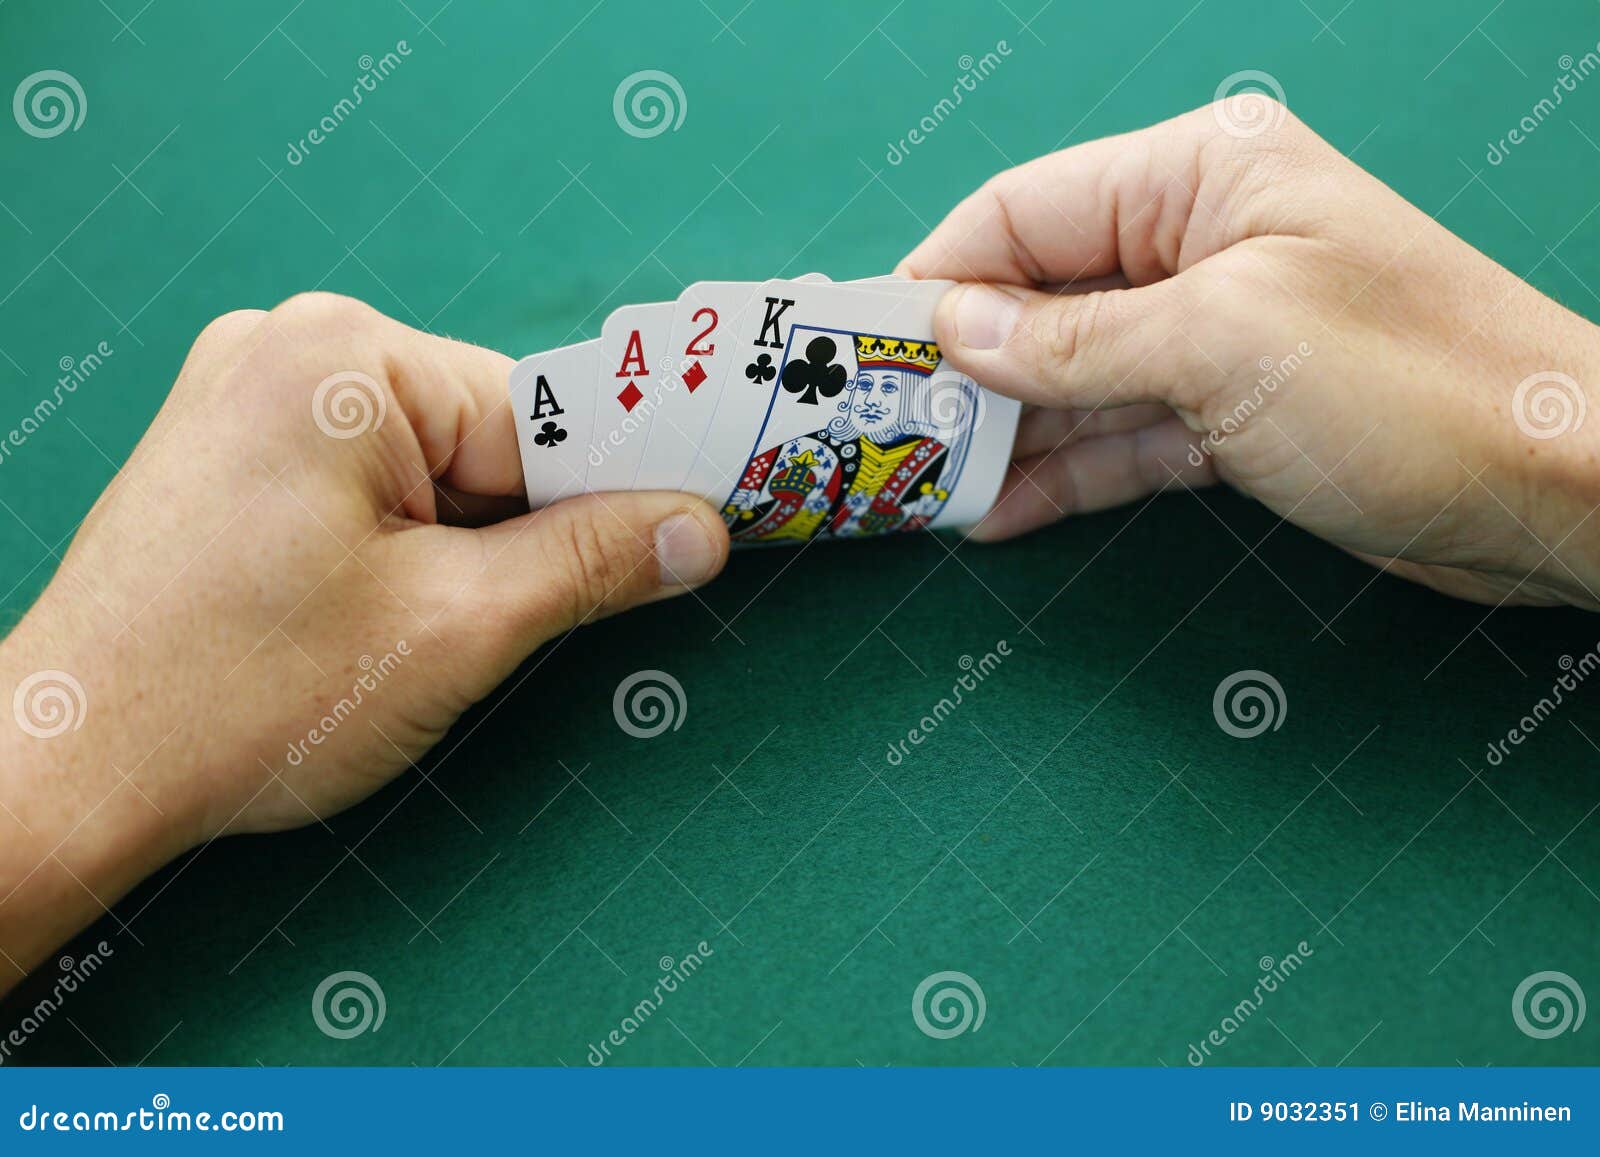 Ace Ace Two King Double Suited Stock Image - Image of deck, game: 9032351